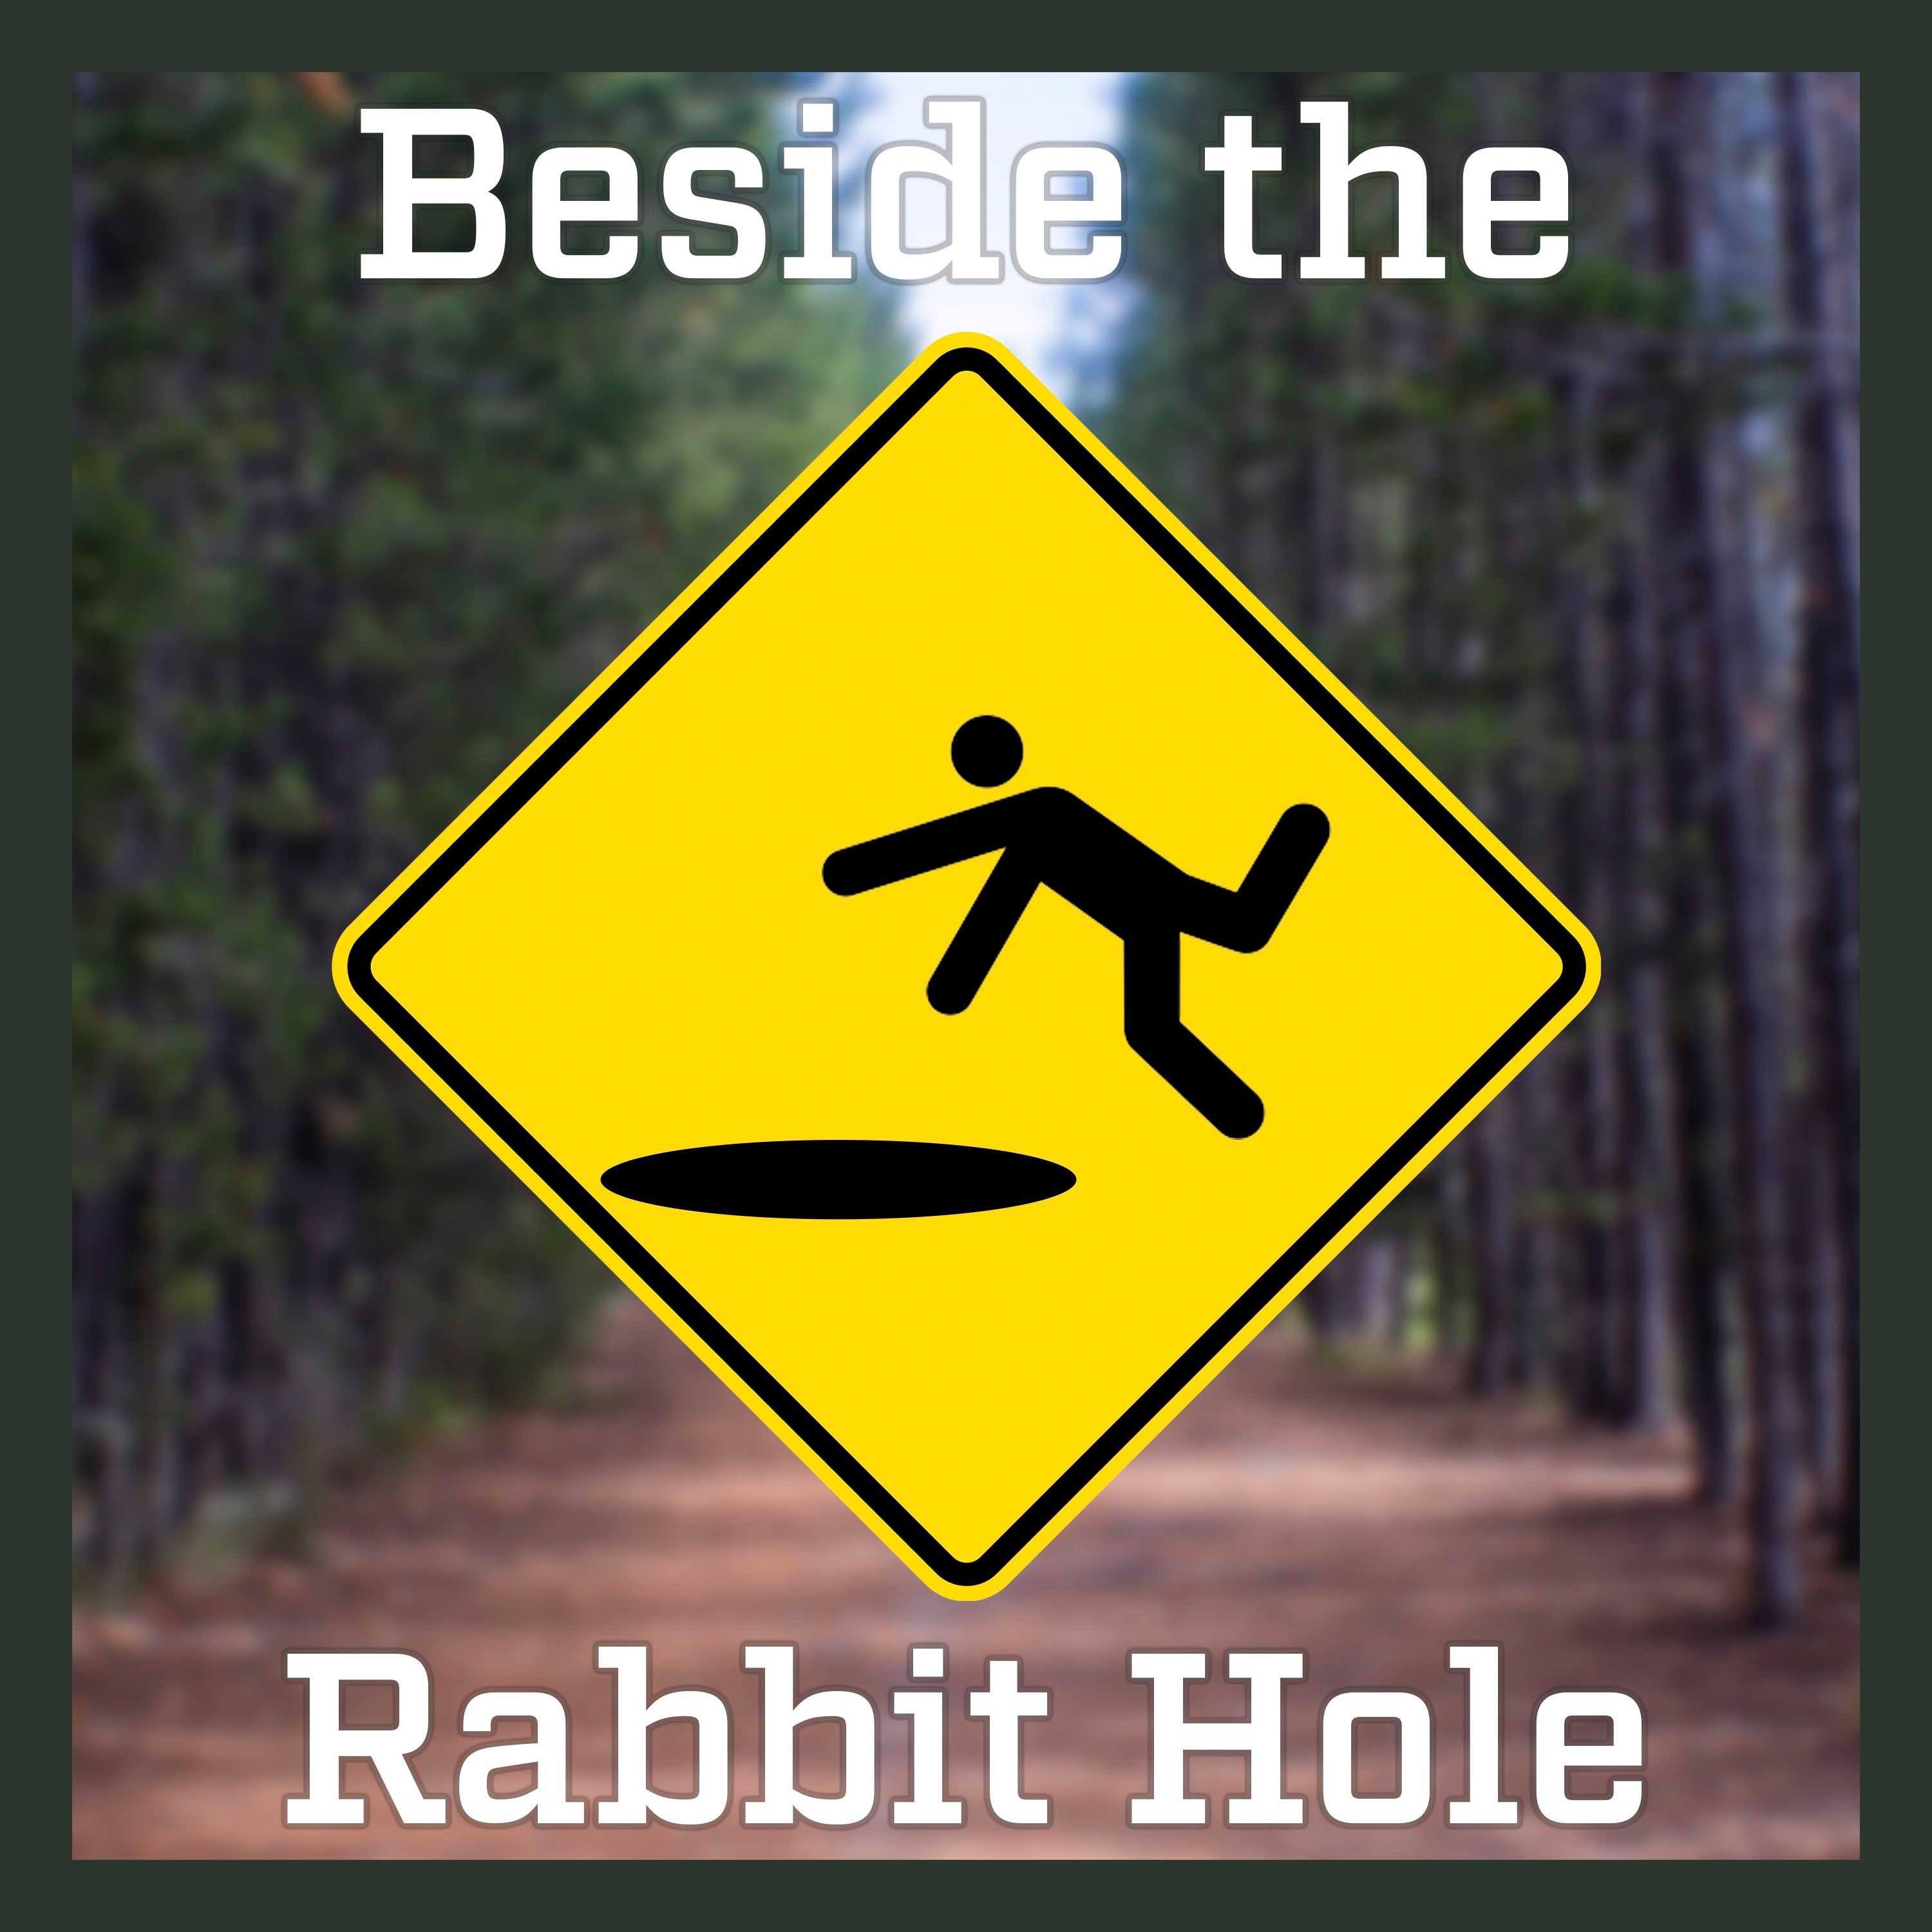 a photo of a yellow warning sign showing a person tripping into a hole. There is text above which reads 'beside the rabbit hole'